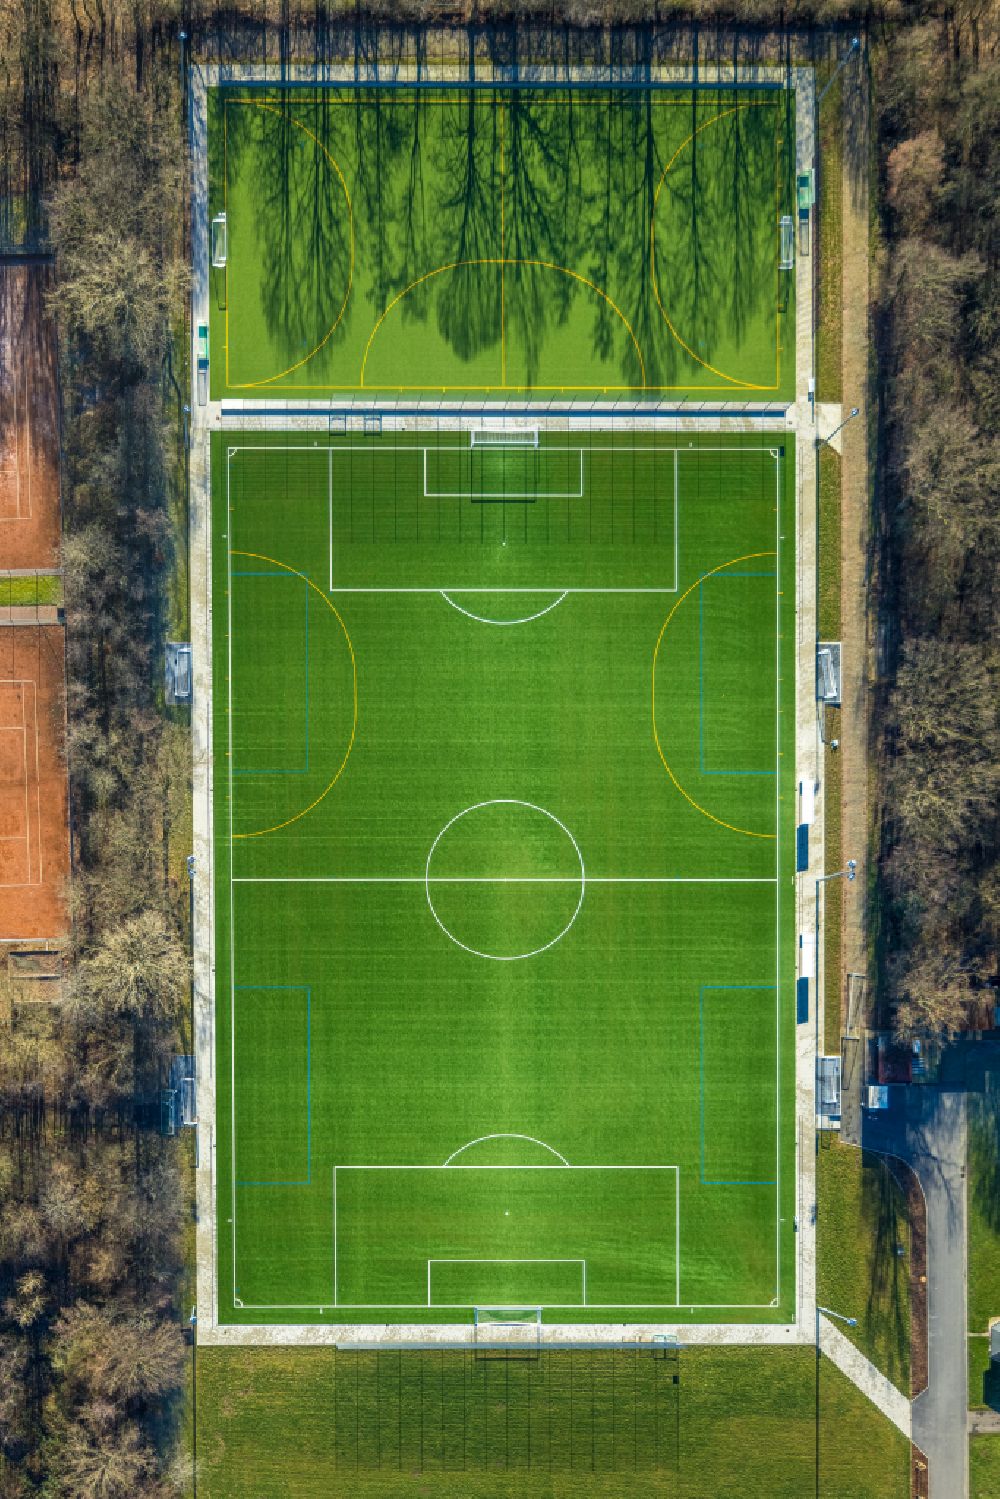 Vertical aerial photograph Werne - Vertical aerial view from the satellite perspective of the sports grounds and football pitch in Sportzentrum Dahl on street Kaethe-Kollwitz-Strasse in Werne at Ruhrgebiet in the state North Rhine-Westphalia, Germany